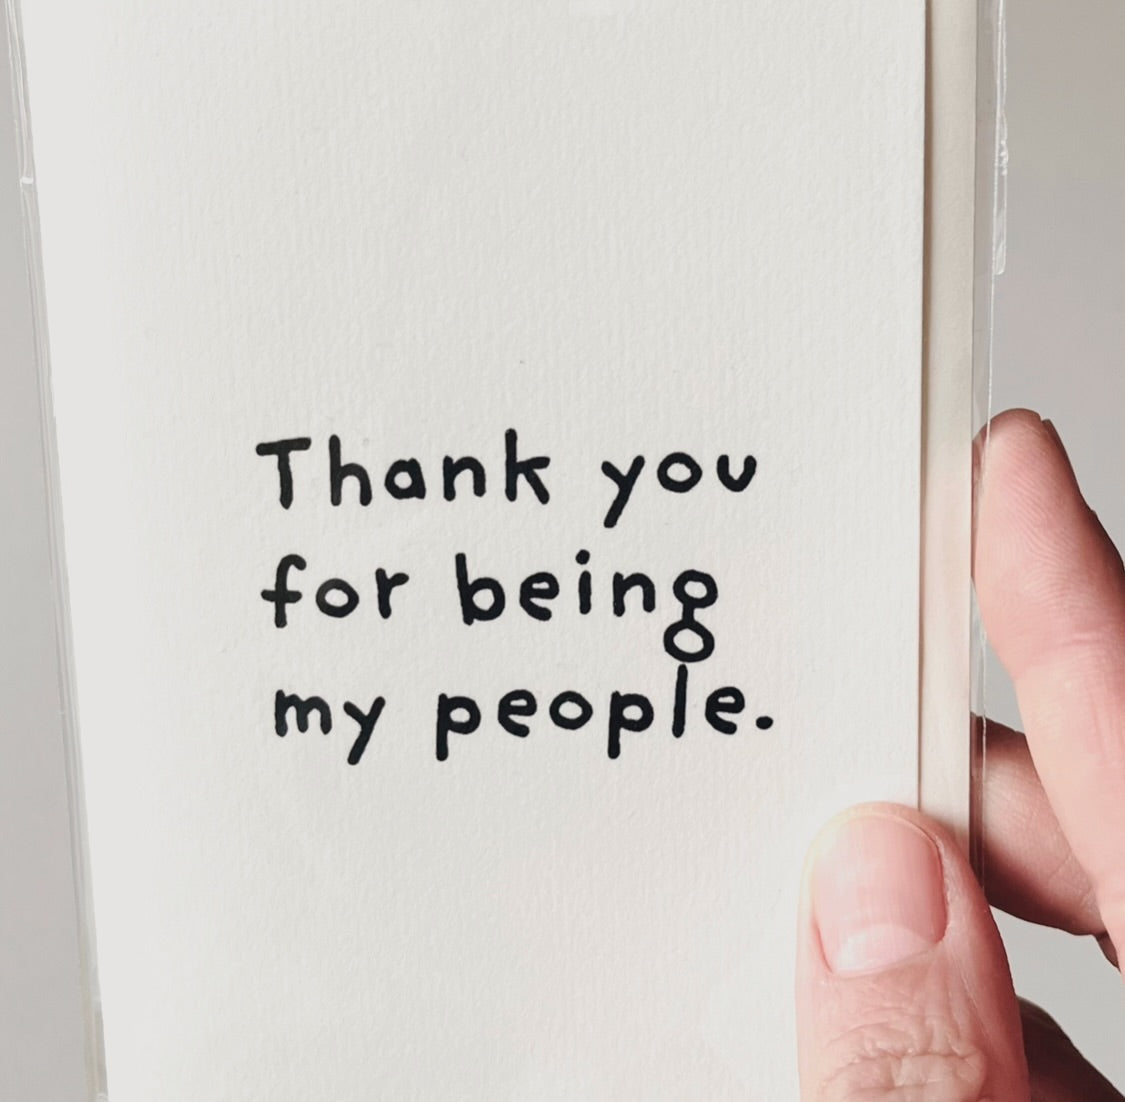 Thank you for being my people.